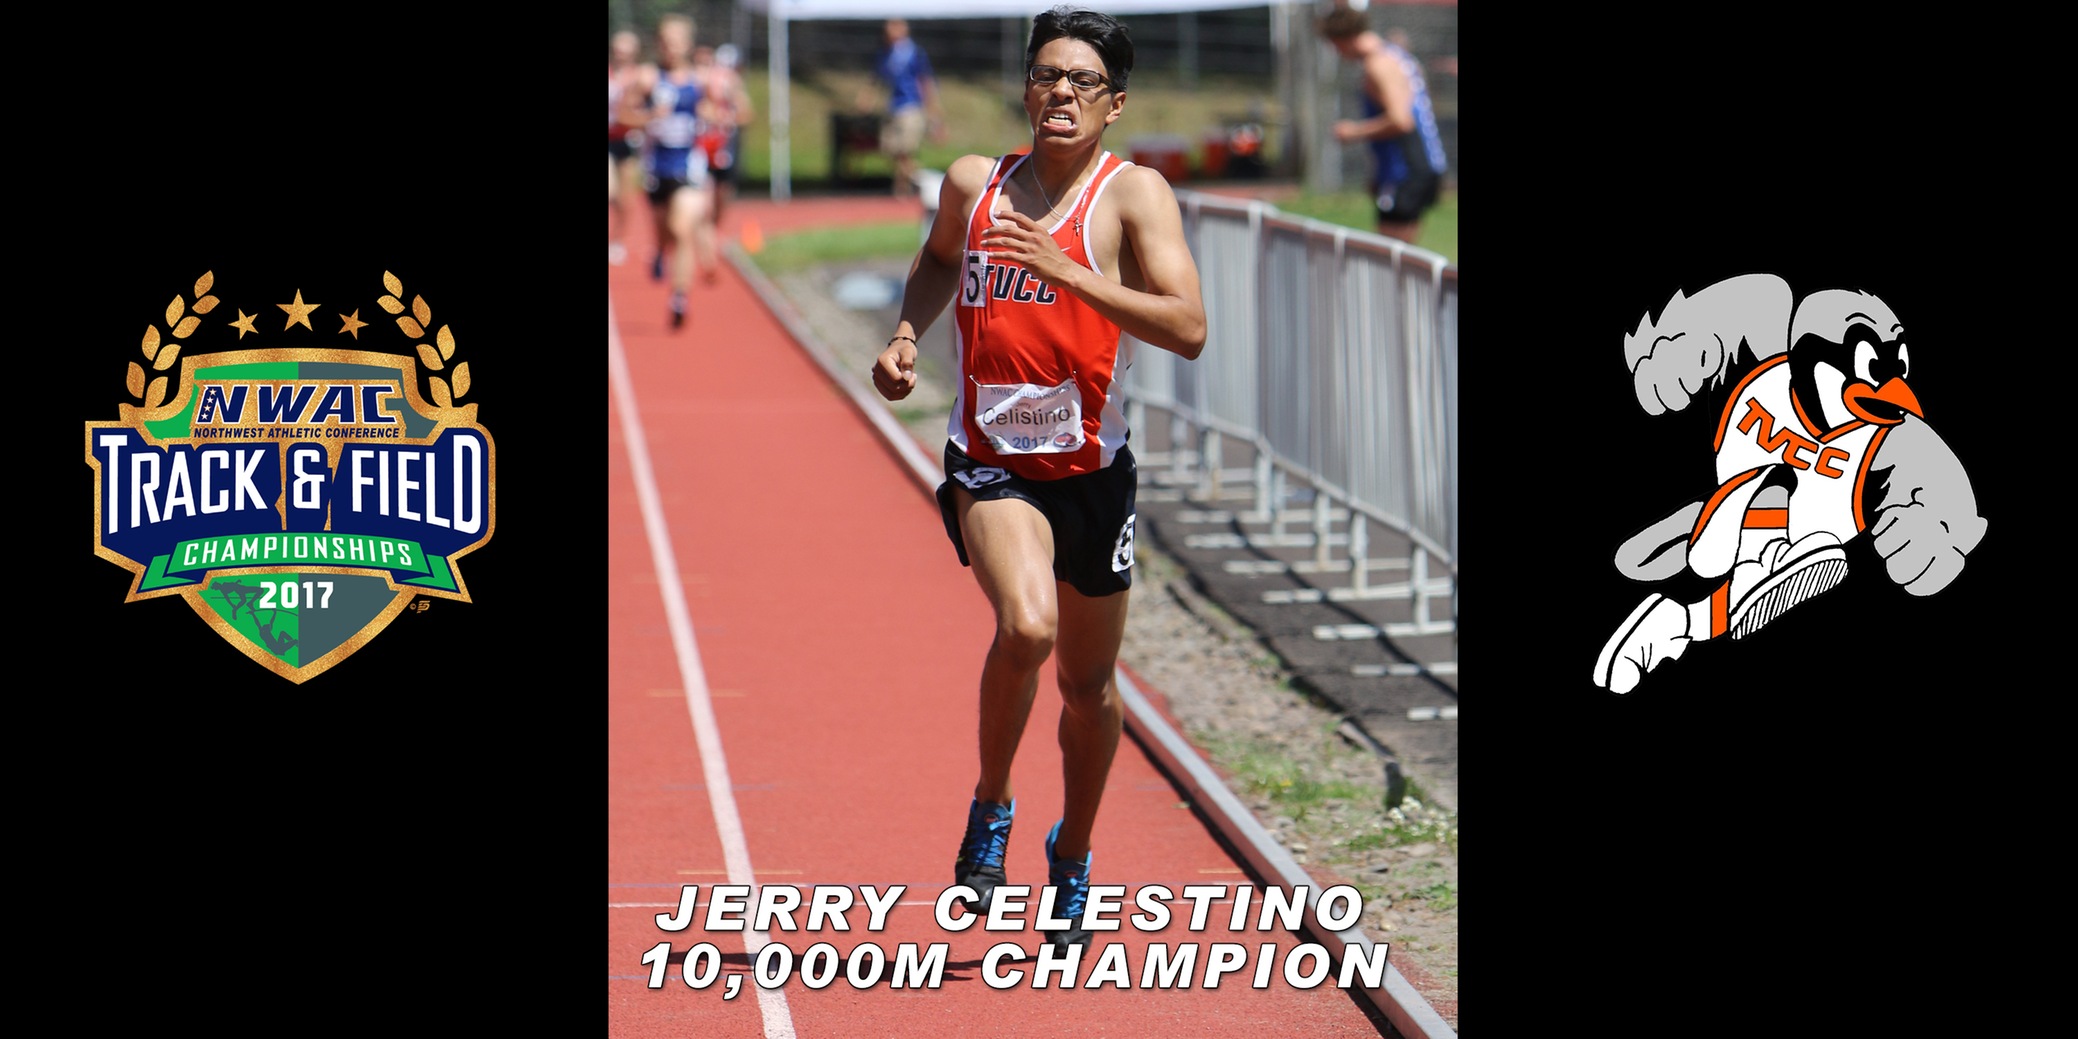 Jerry Celestino wins 10K at NWAC Track and Field Championships